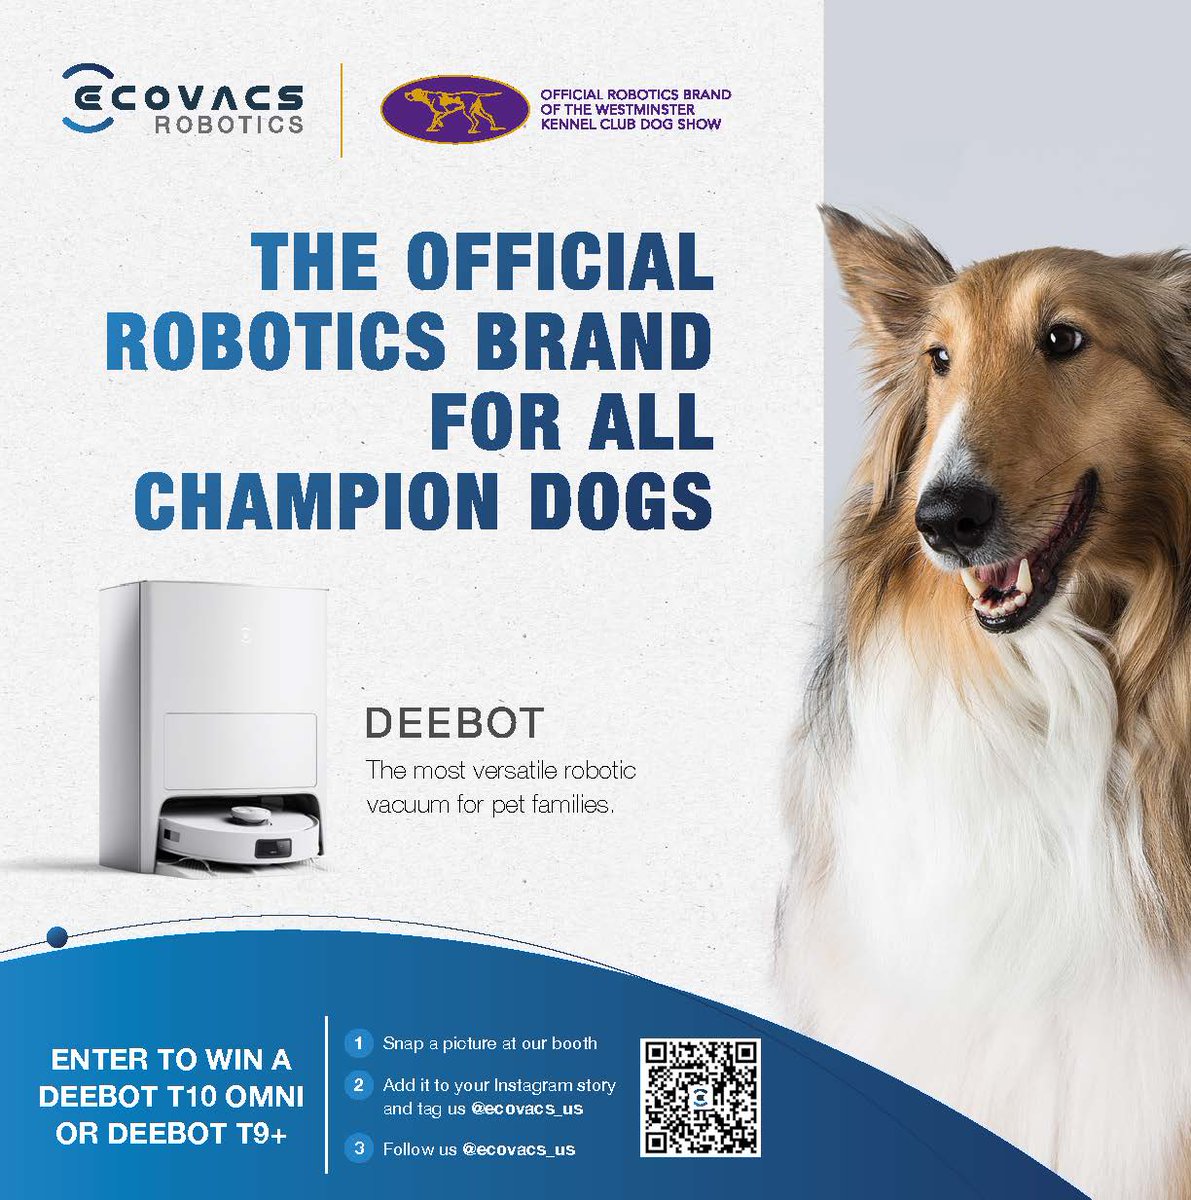 WIN A DEEBOT Vacuuming + Mopping Robot!

1. Snap a picture at our booth 
2. Add it to your Instagram story and tag us @ecovacs_us 
3. Follow us @ecovacs_us

Winner's announced on May 8.

#ECOVACSxWKCDogShow #PawsomeDEEBOT